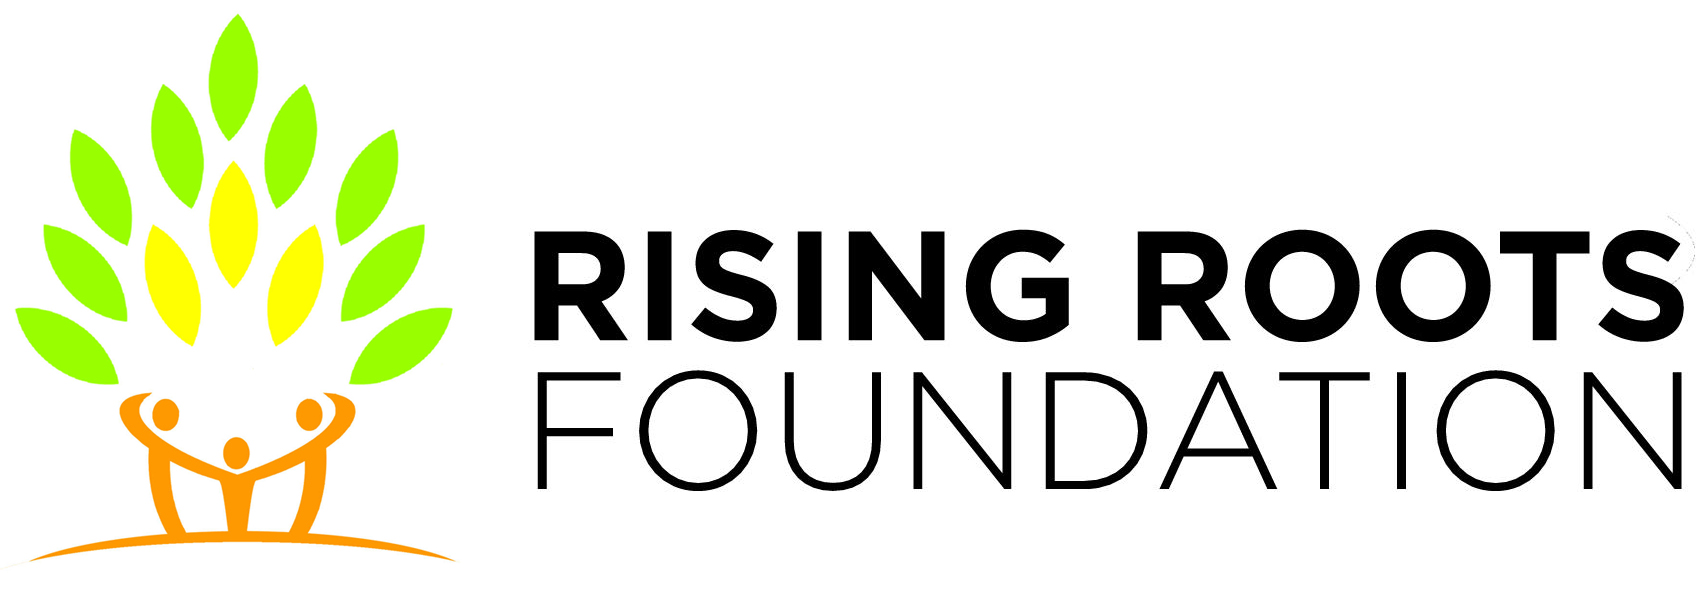 Rising Roots Foundation